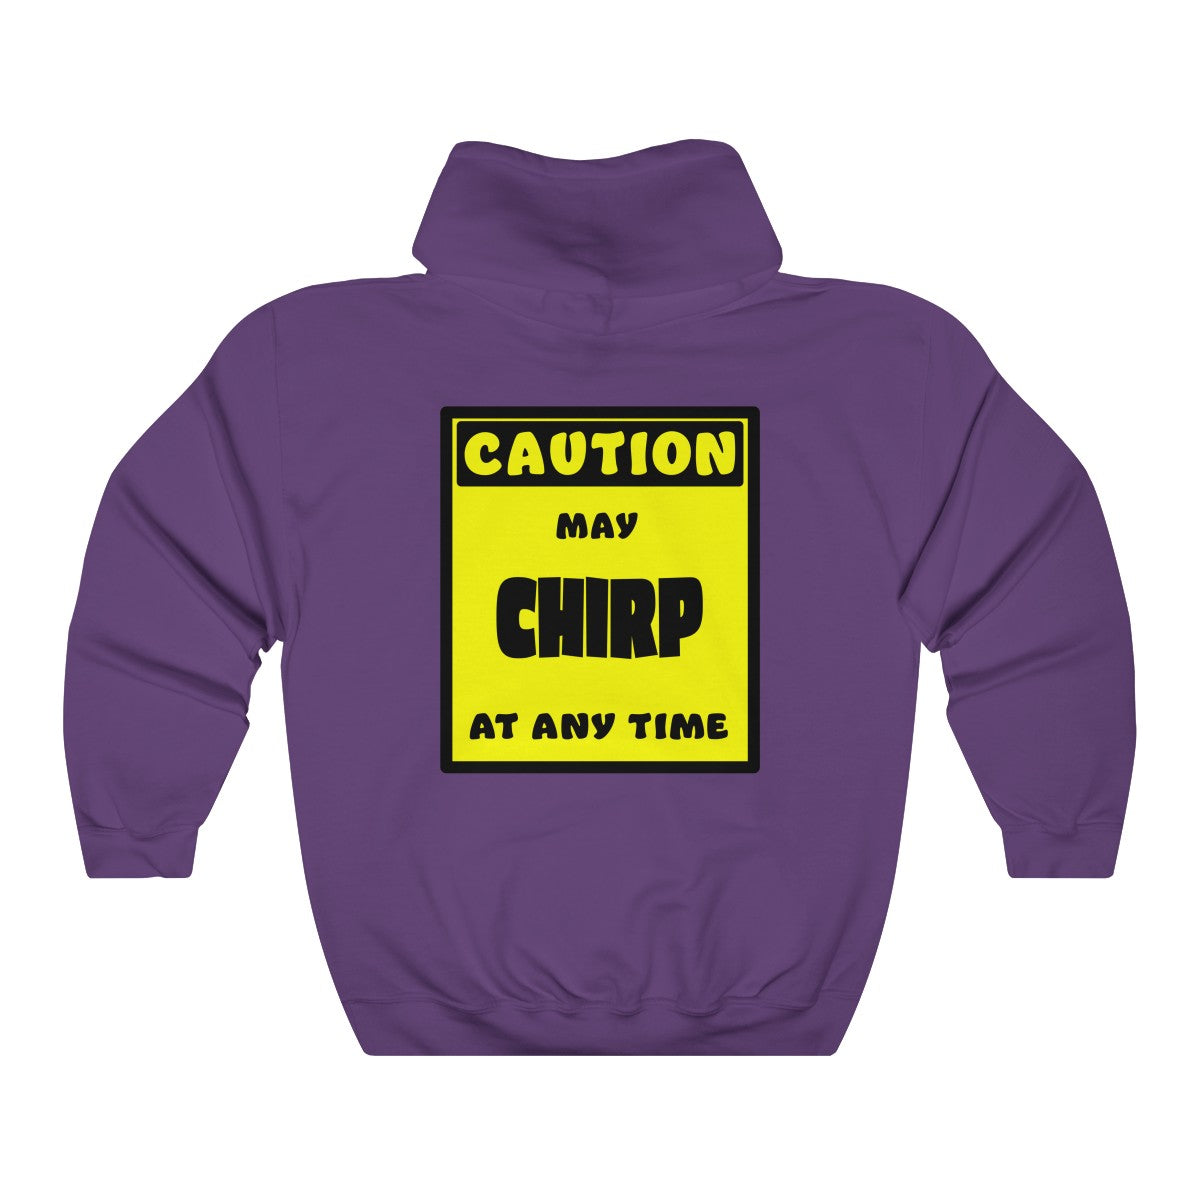 CAUTION! May CHIRP at any time! - Hoodie Hoodie AFLT-Whootorca Purple S 